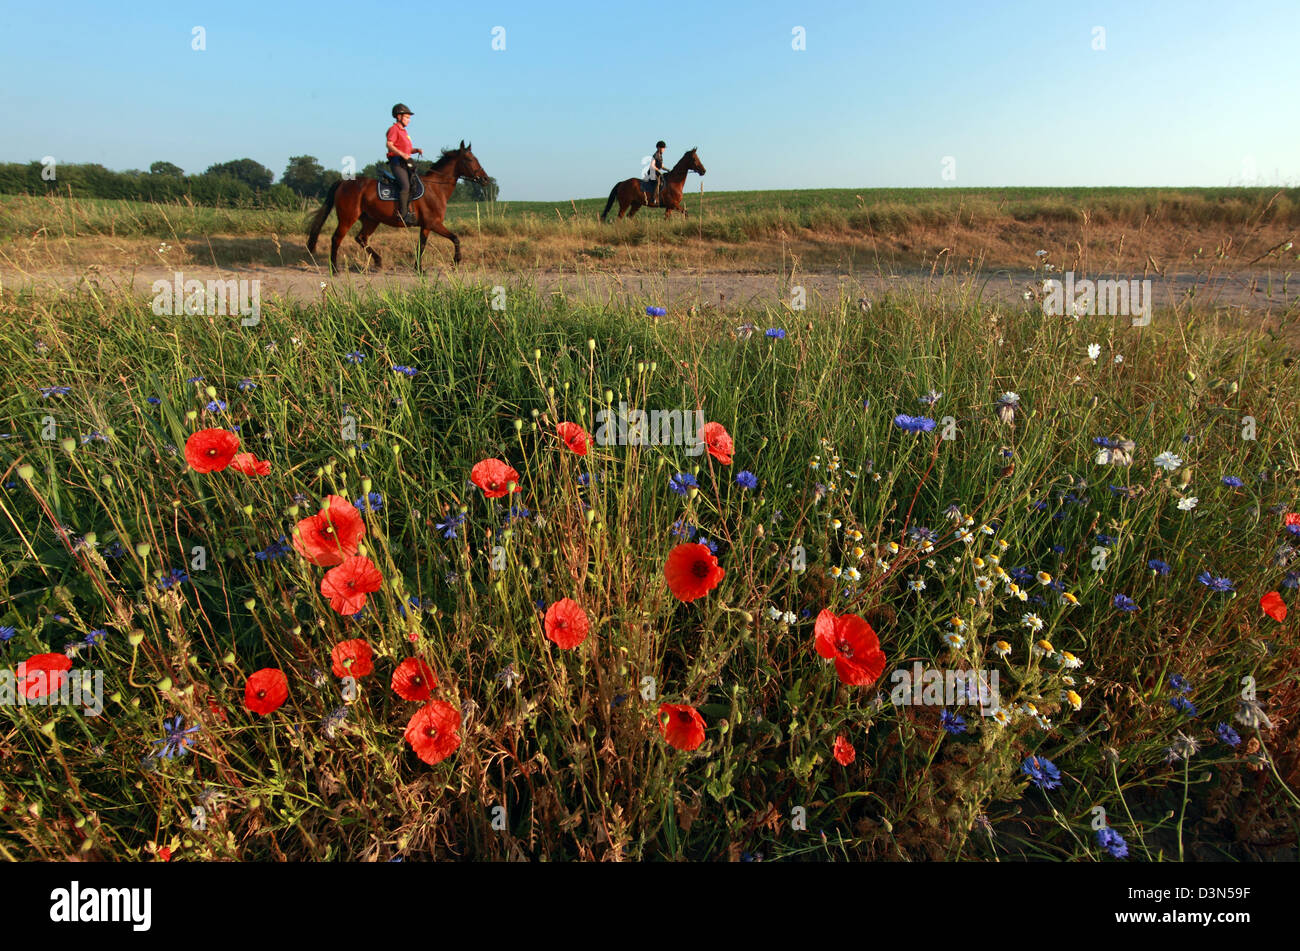 Britz, Germany, riders on an endurance ride Stock Photo